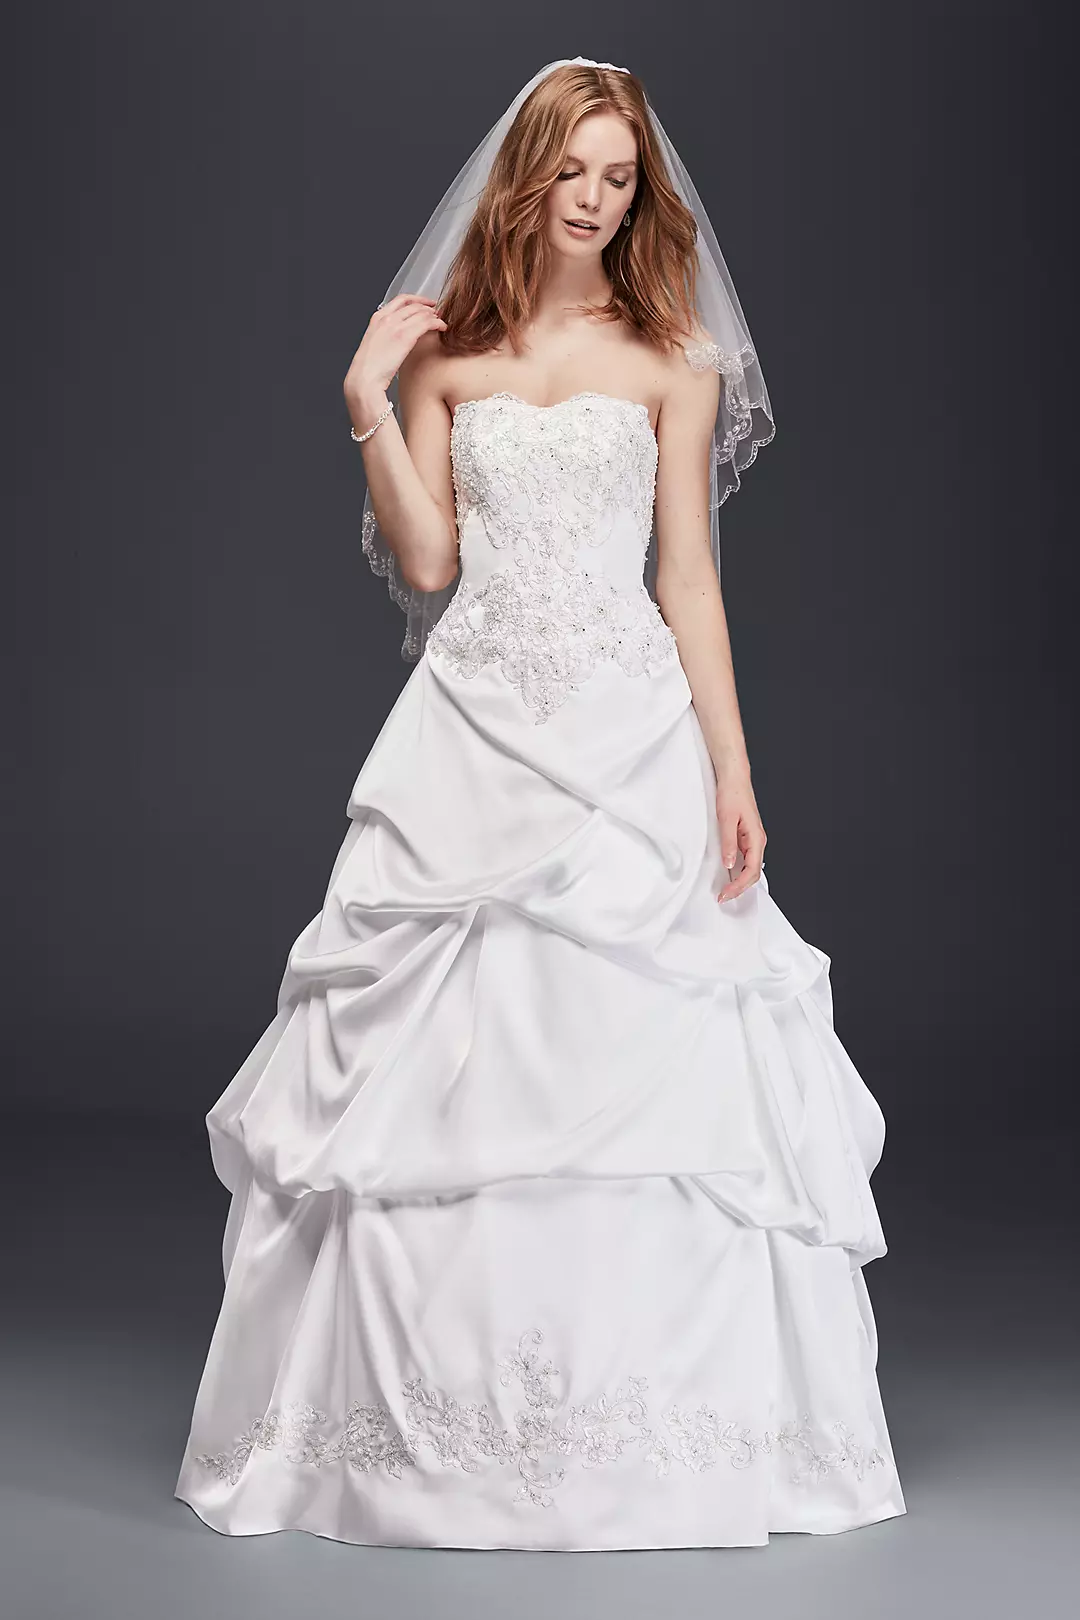 Satin Wedding Ball Gown with Drop Waist Image